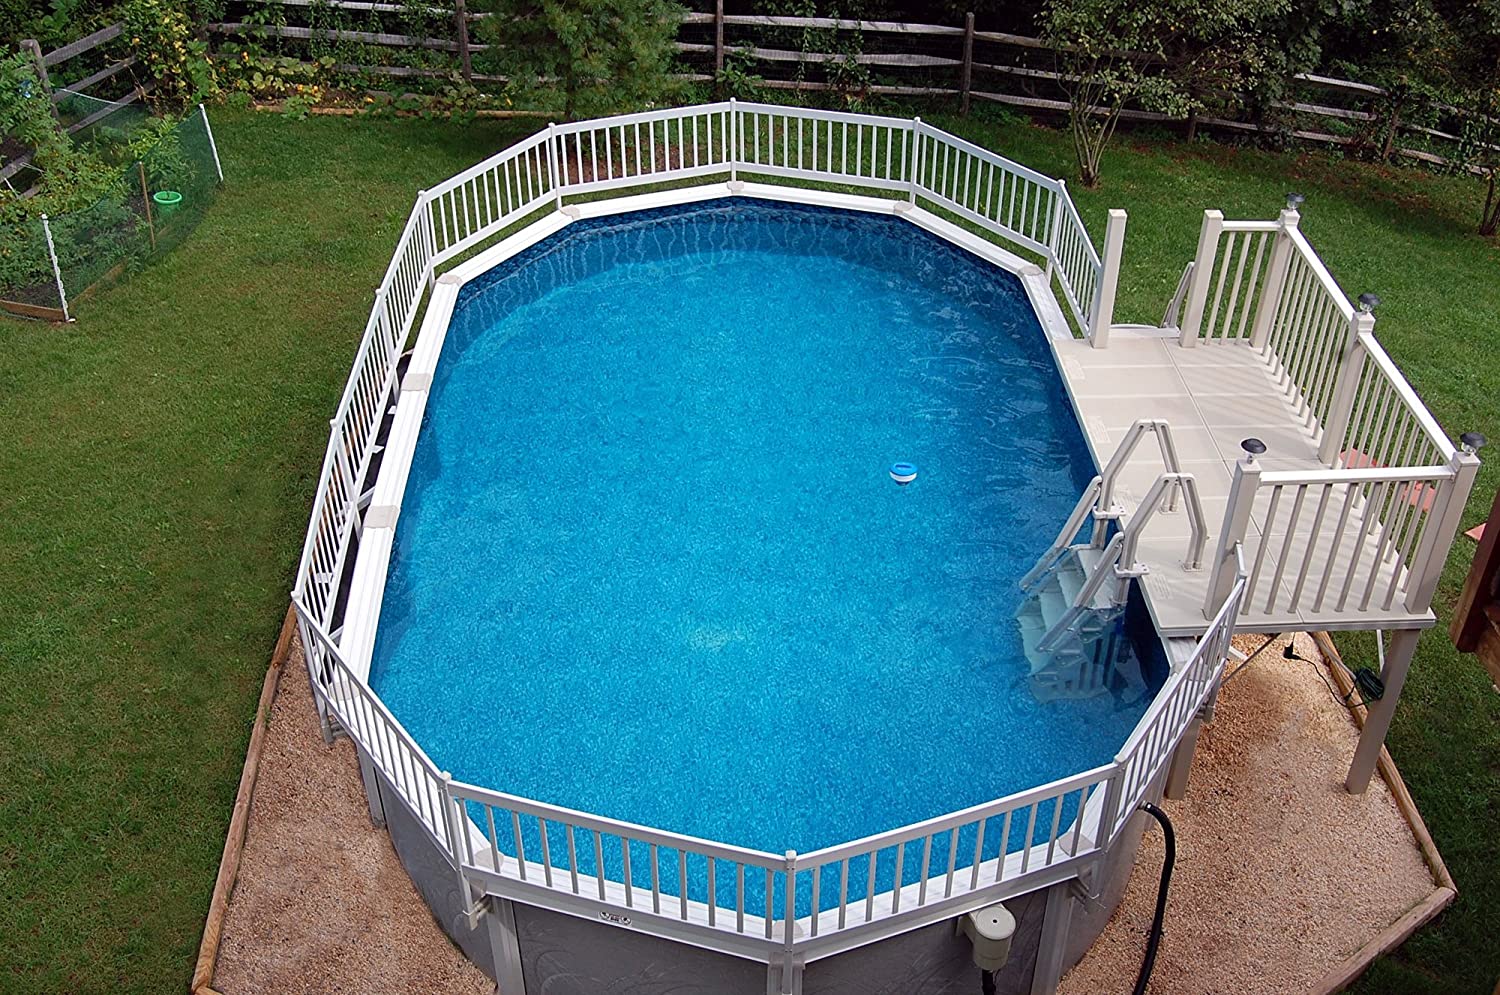 What Are The Advantages Of Easy Pool Step for Above Ground Pools?